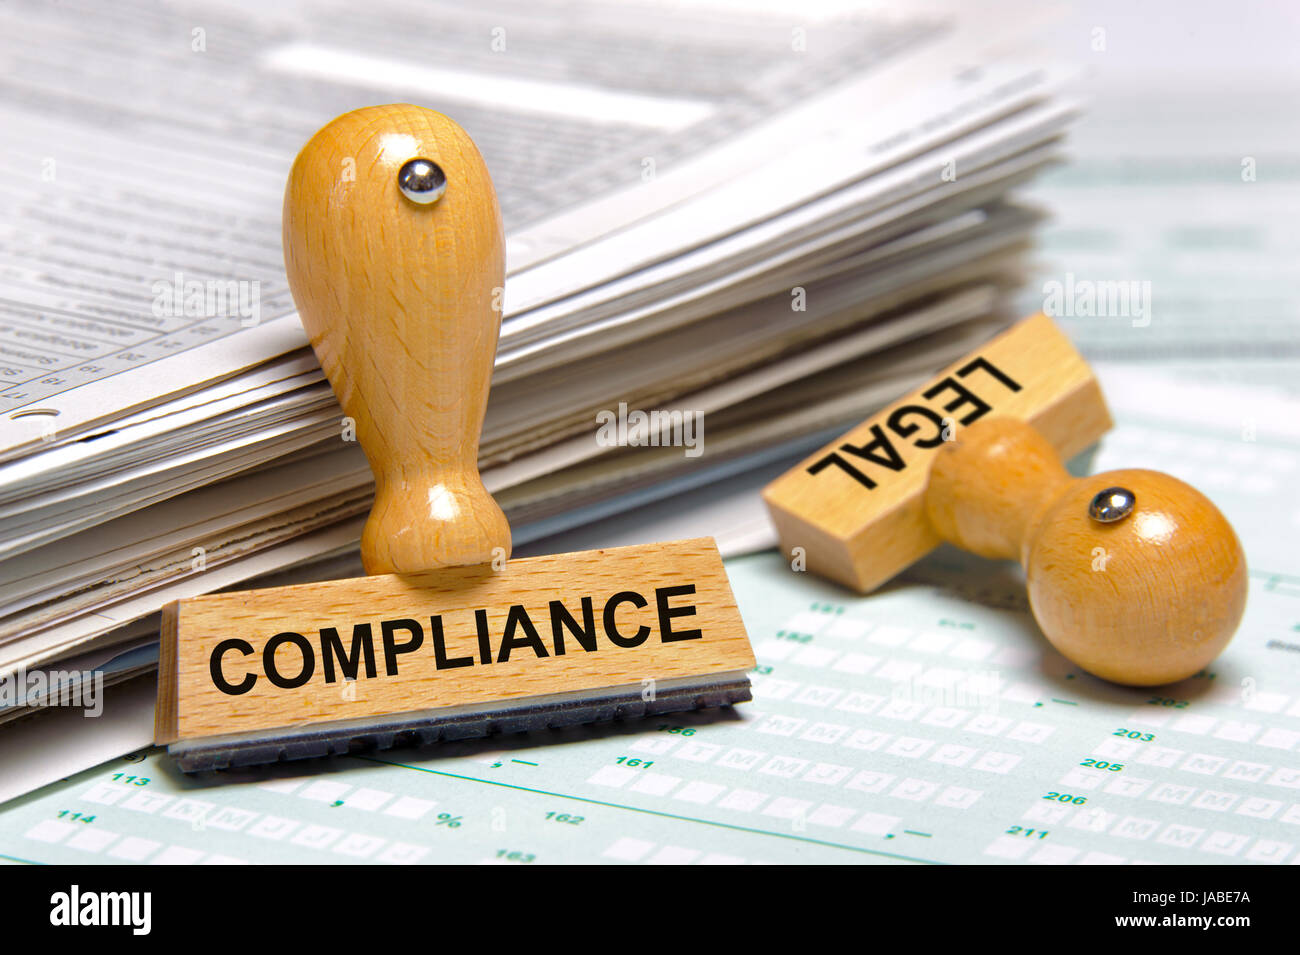 compliance and legal printed on stamps laying on stack of forms Stock Photo